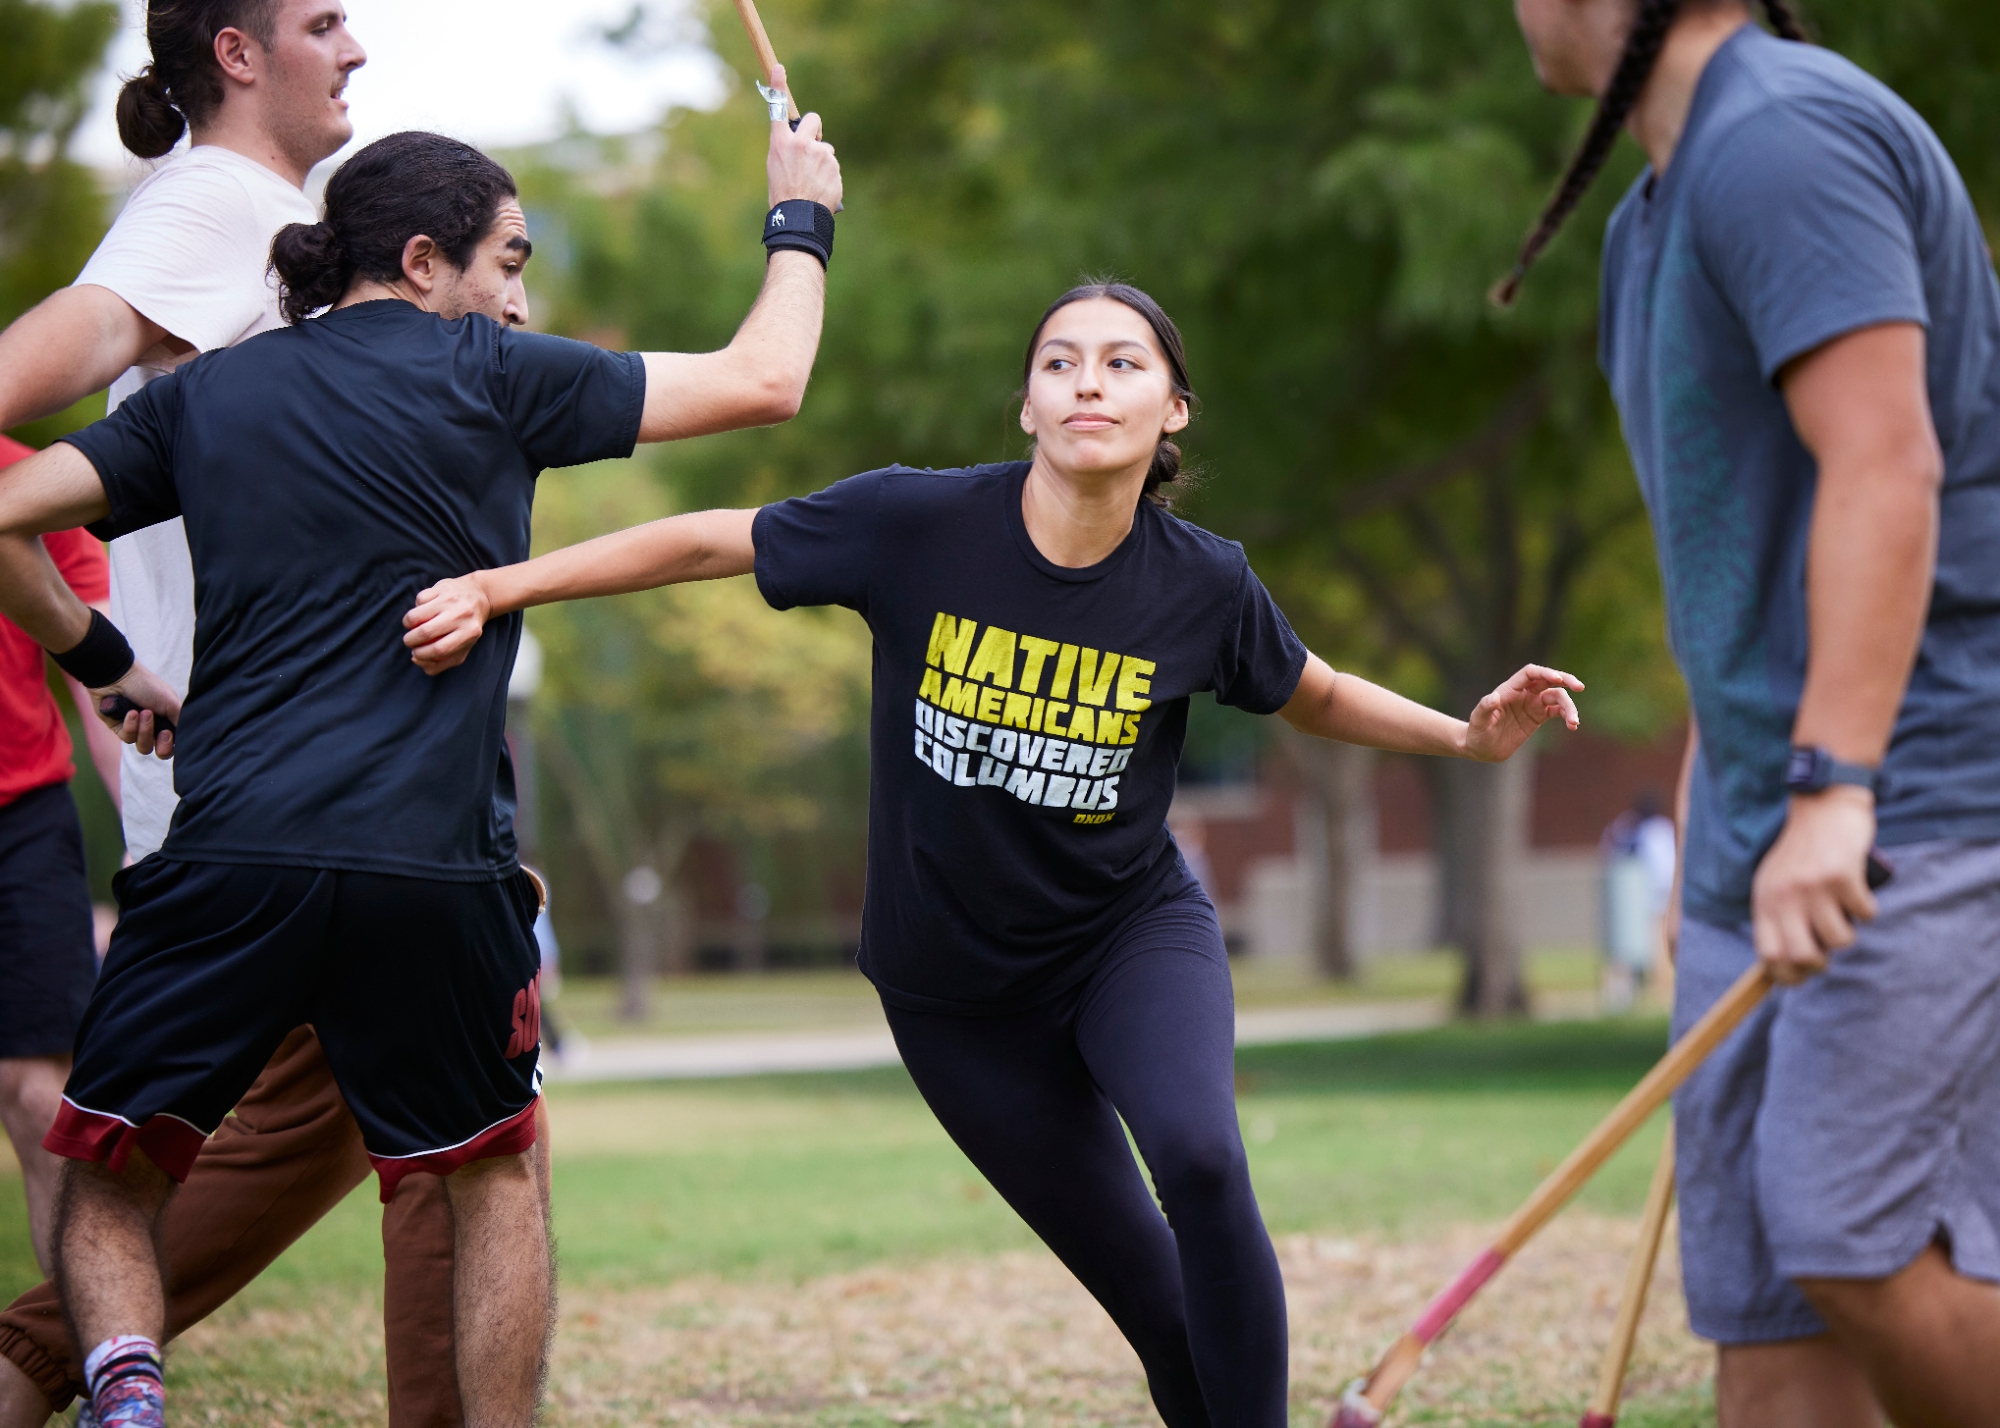 Four Native students playing stickball. A young woman is in the middle pushing her way through with a shirt that reads "Native Americans Discovered Columbus."